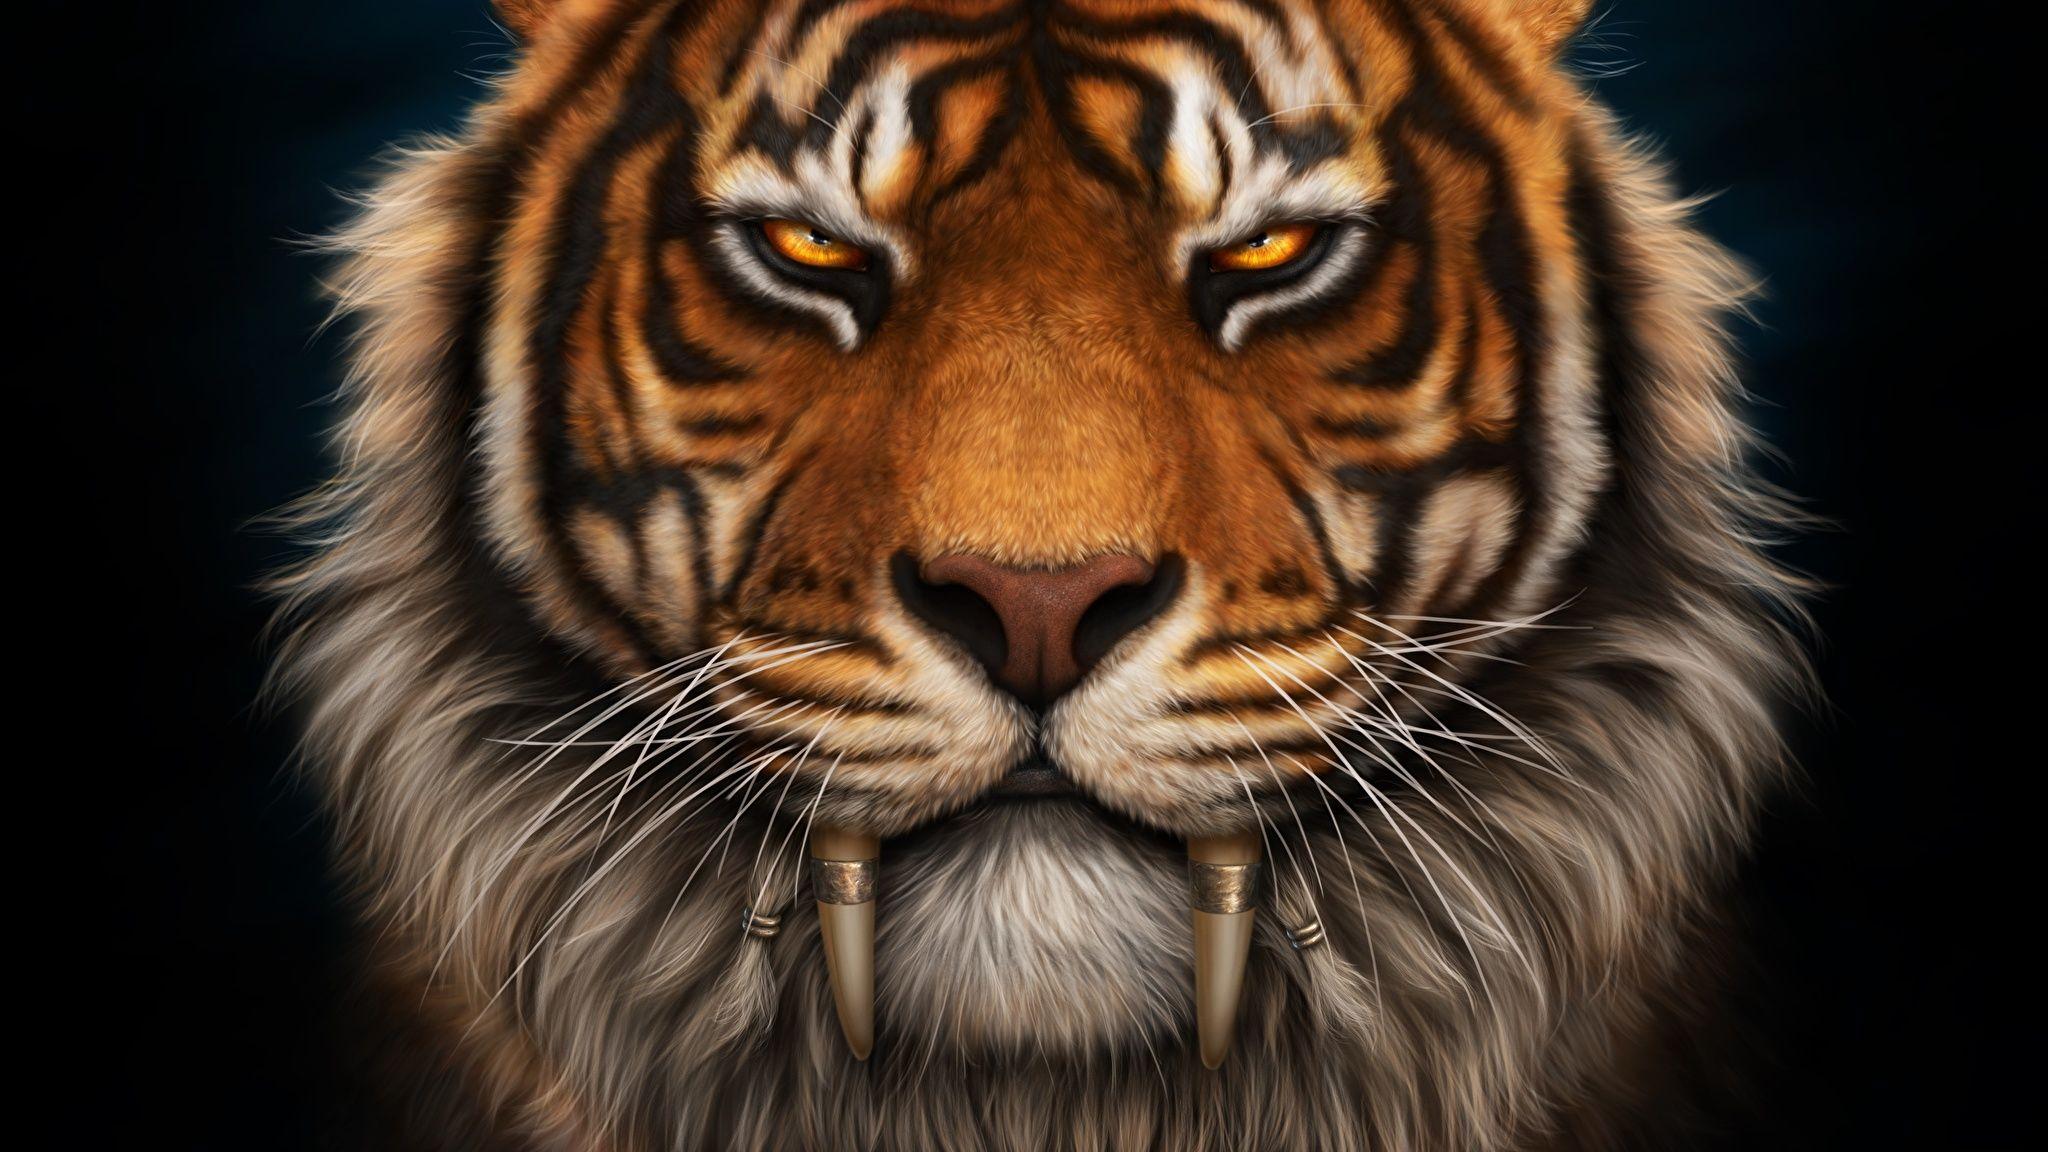 Saber tooth tiger wallpaper Gallery